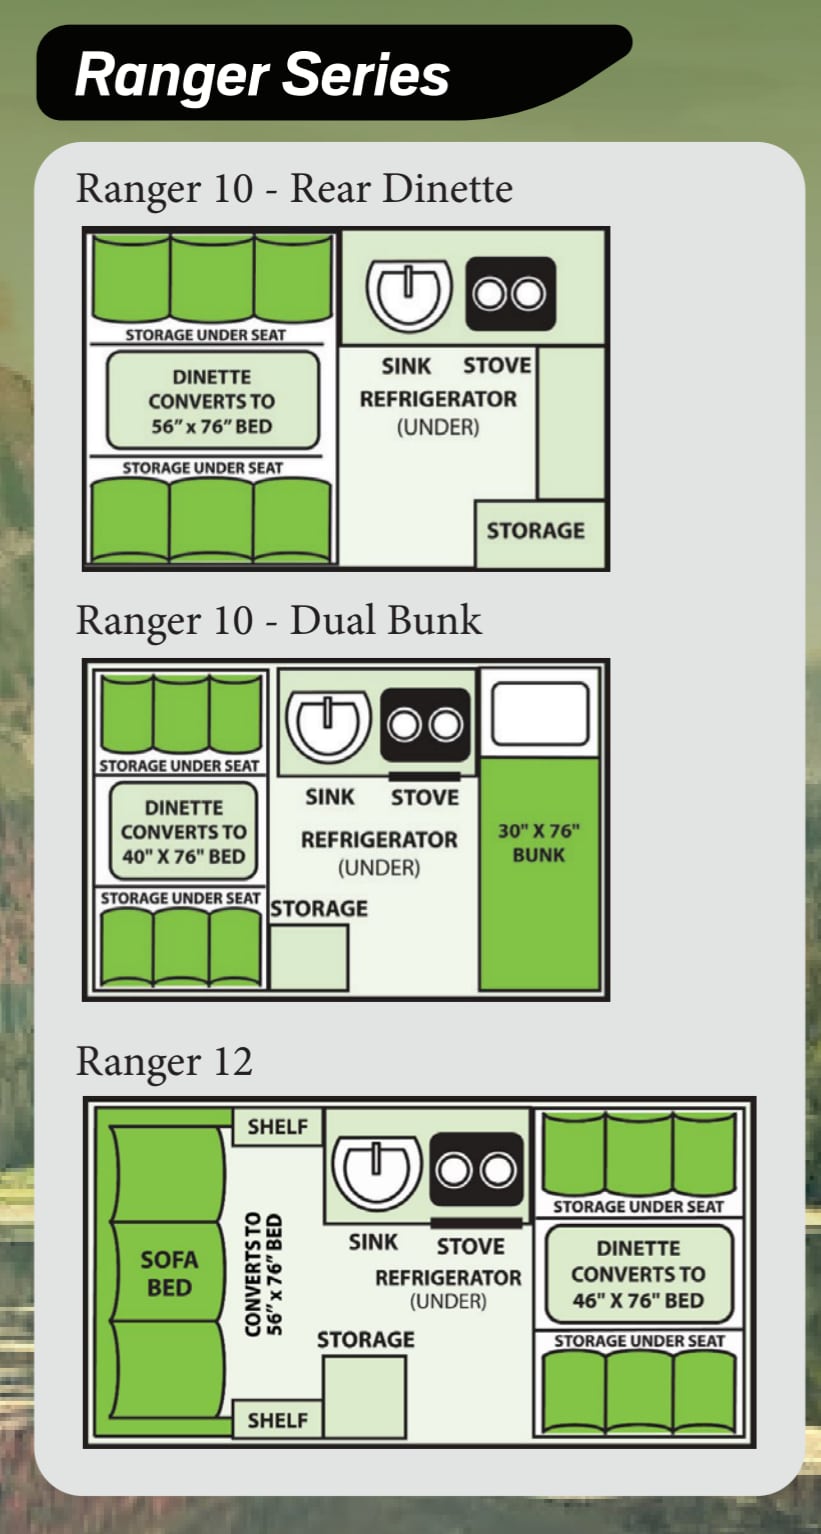 Floor plans for different configurations of a 'ranger - series' recreational vehicle focusing on dining and sleeping areas.